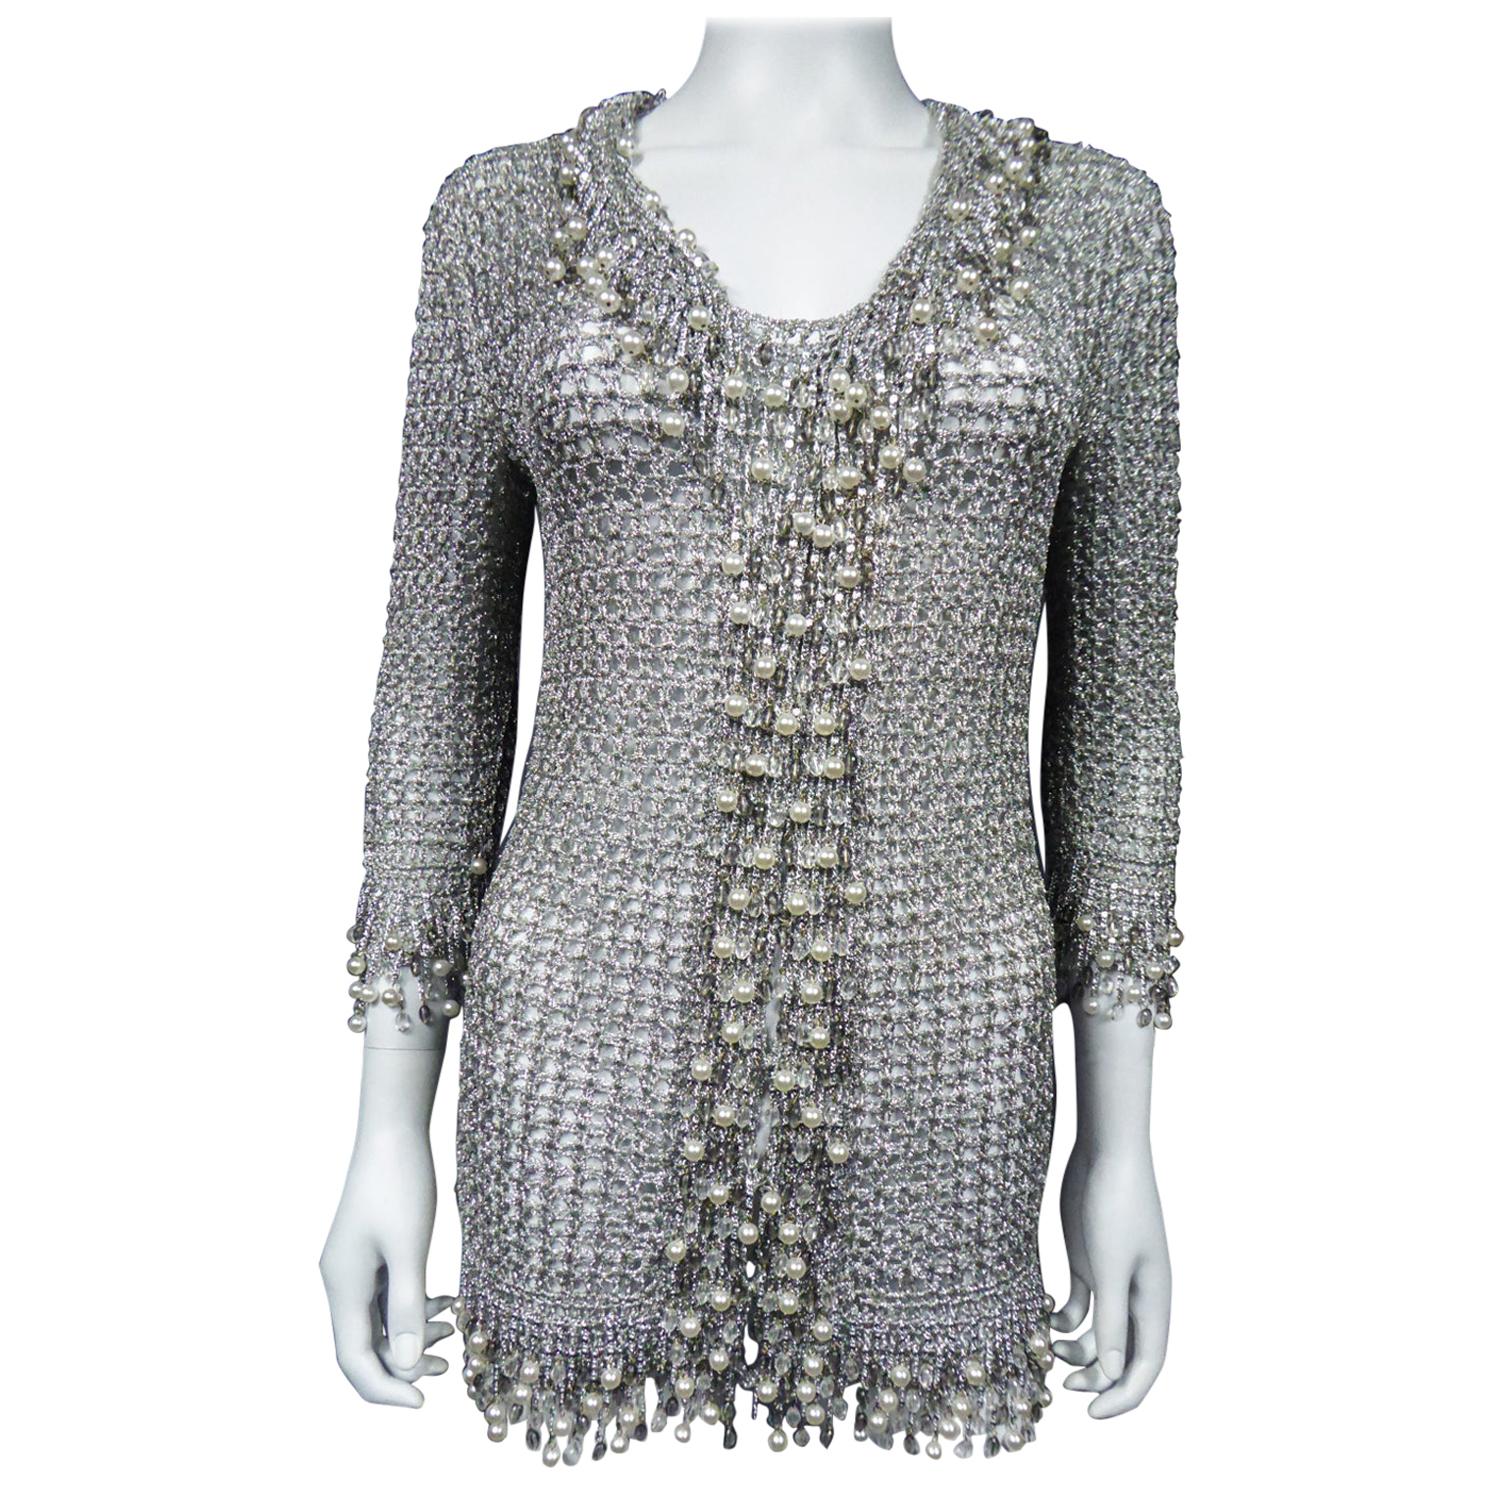 A Loris Azzaro Evening Jacket in Silver Lurex Embroidered with Pearls Circa 1970